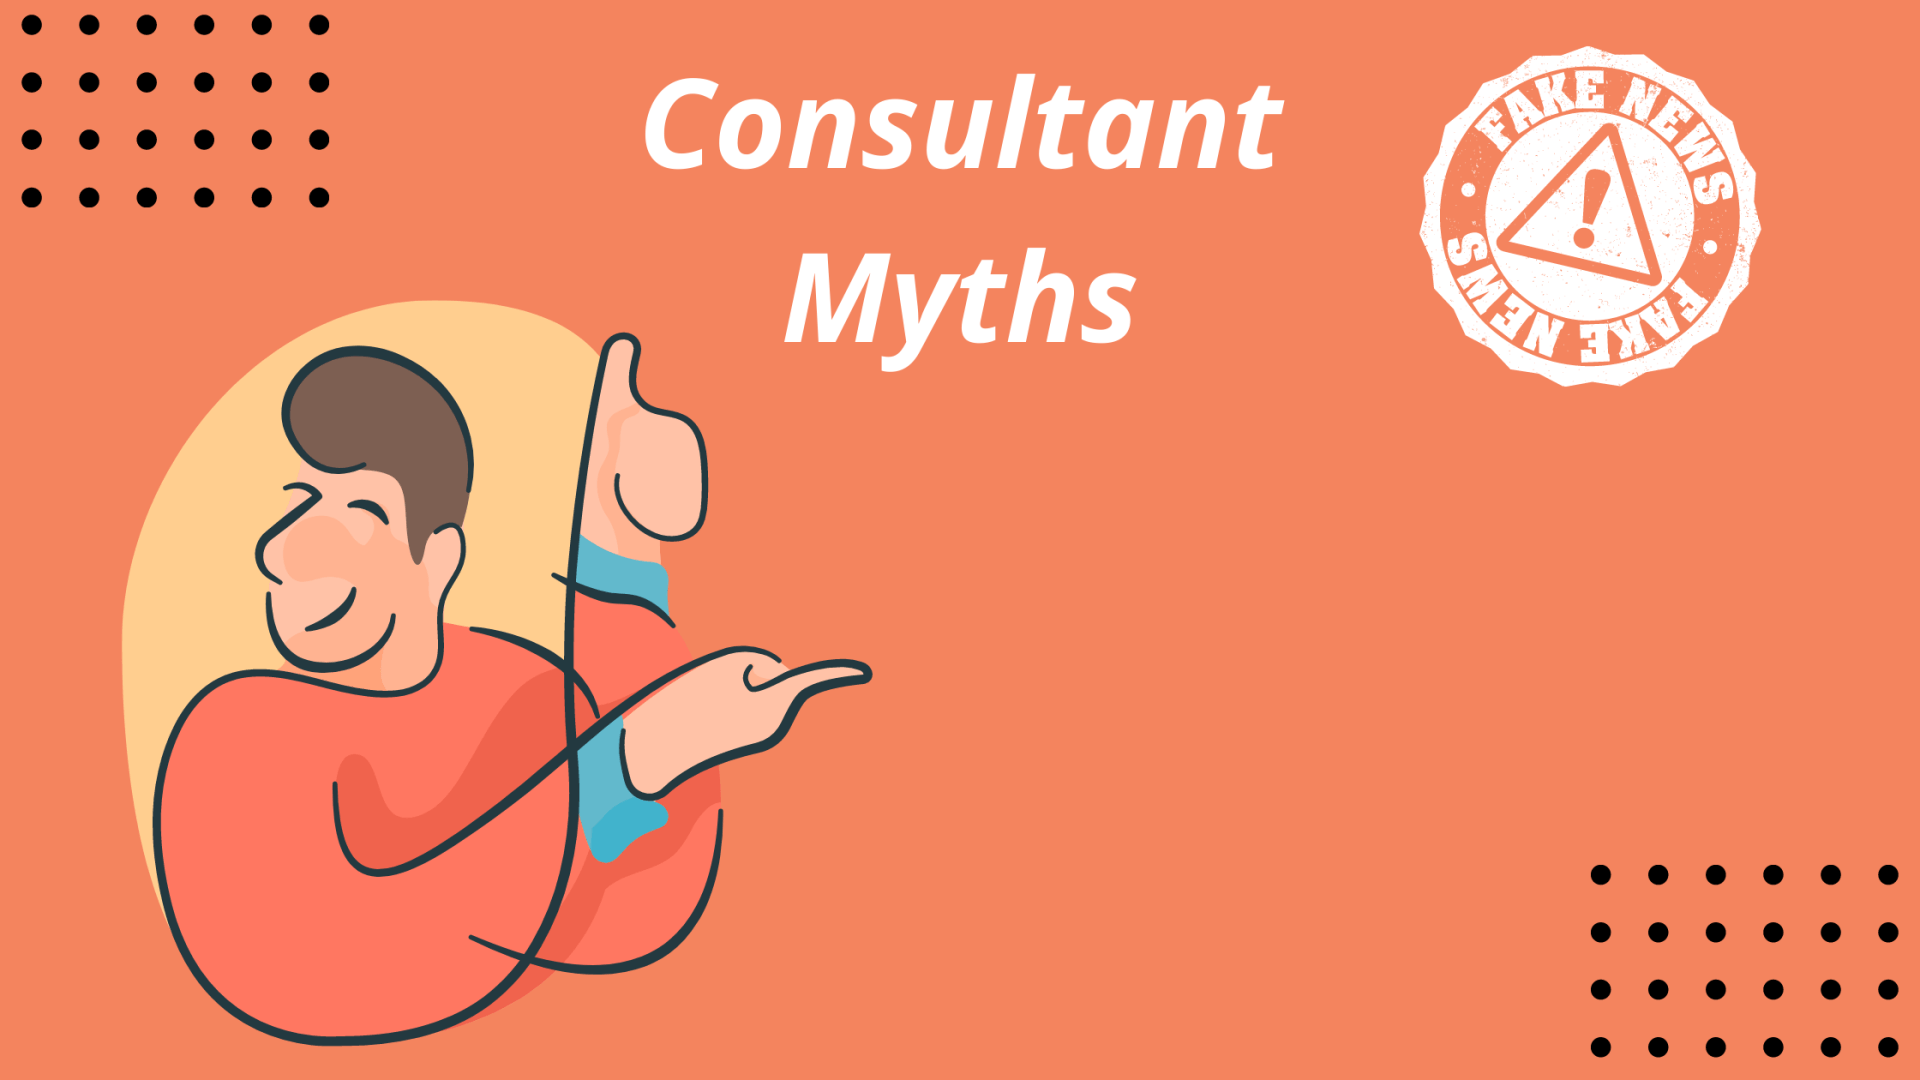 Freelance consulting myths